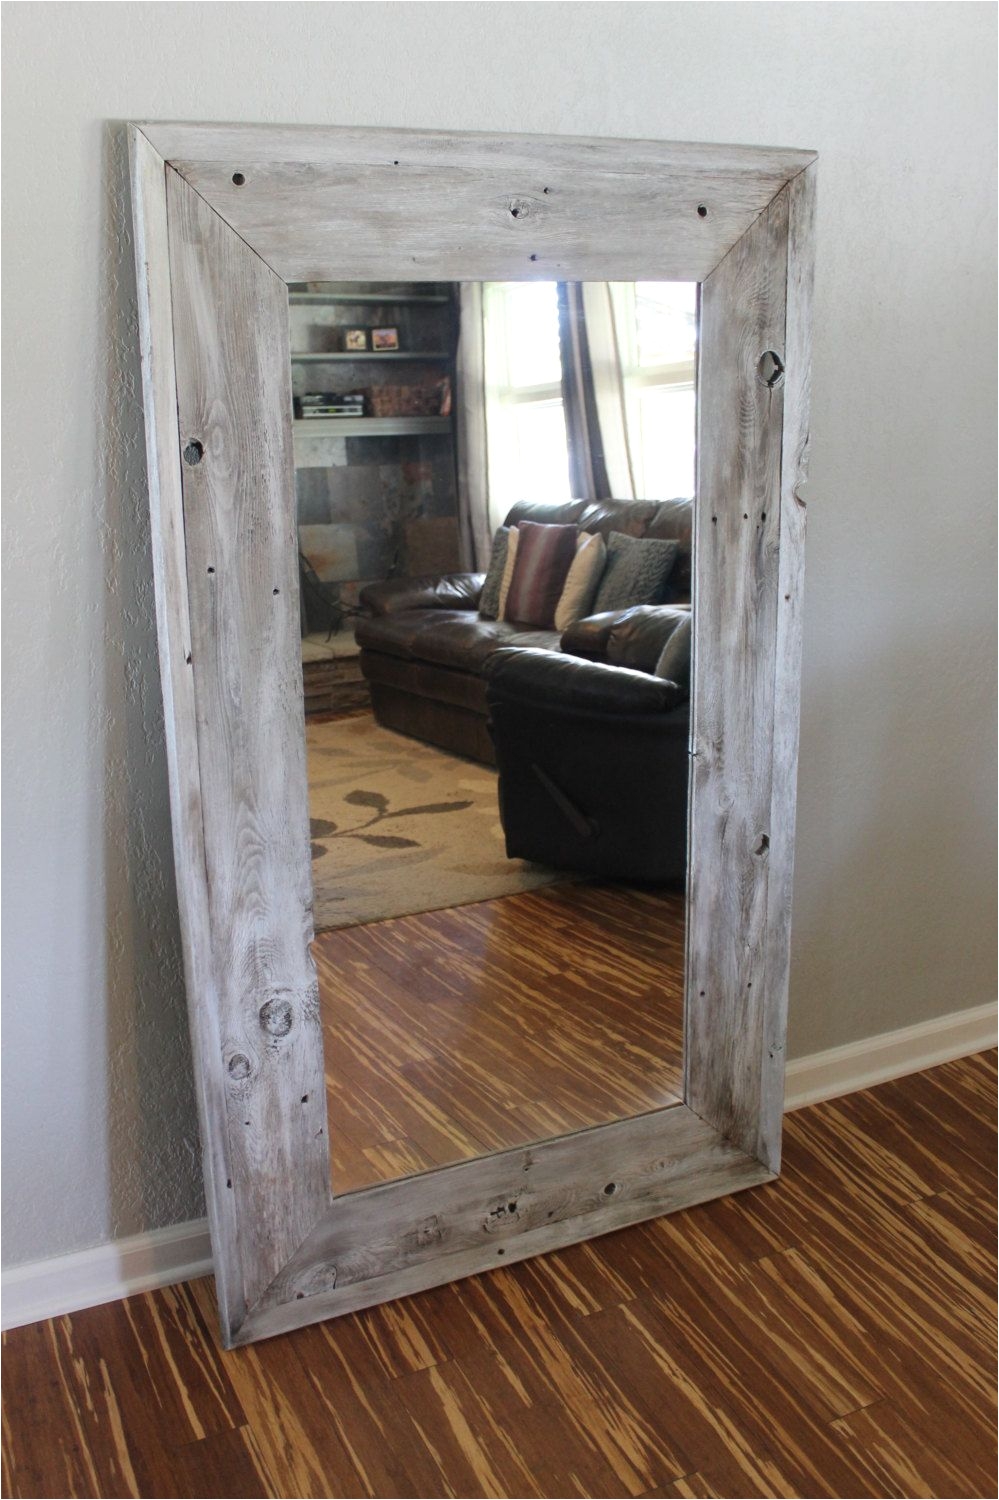 Crate and Barrel Live Edge Floor Mirror Reclaimed Wood Full Length Floor Mirror with A Whitewash Finish 36